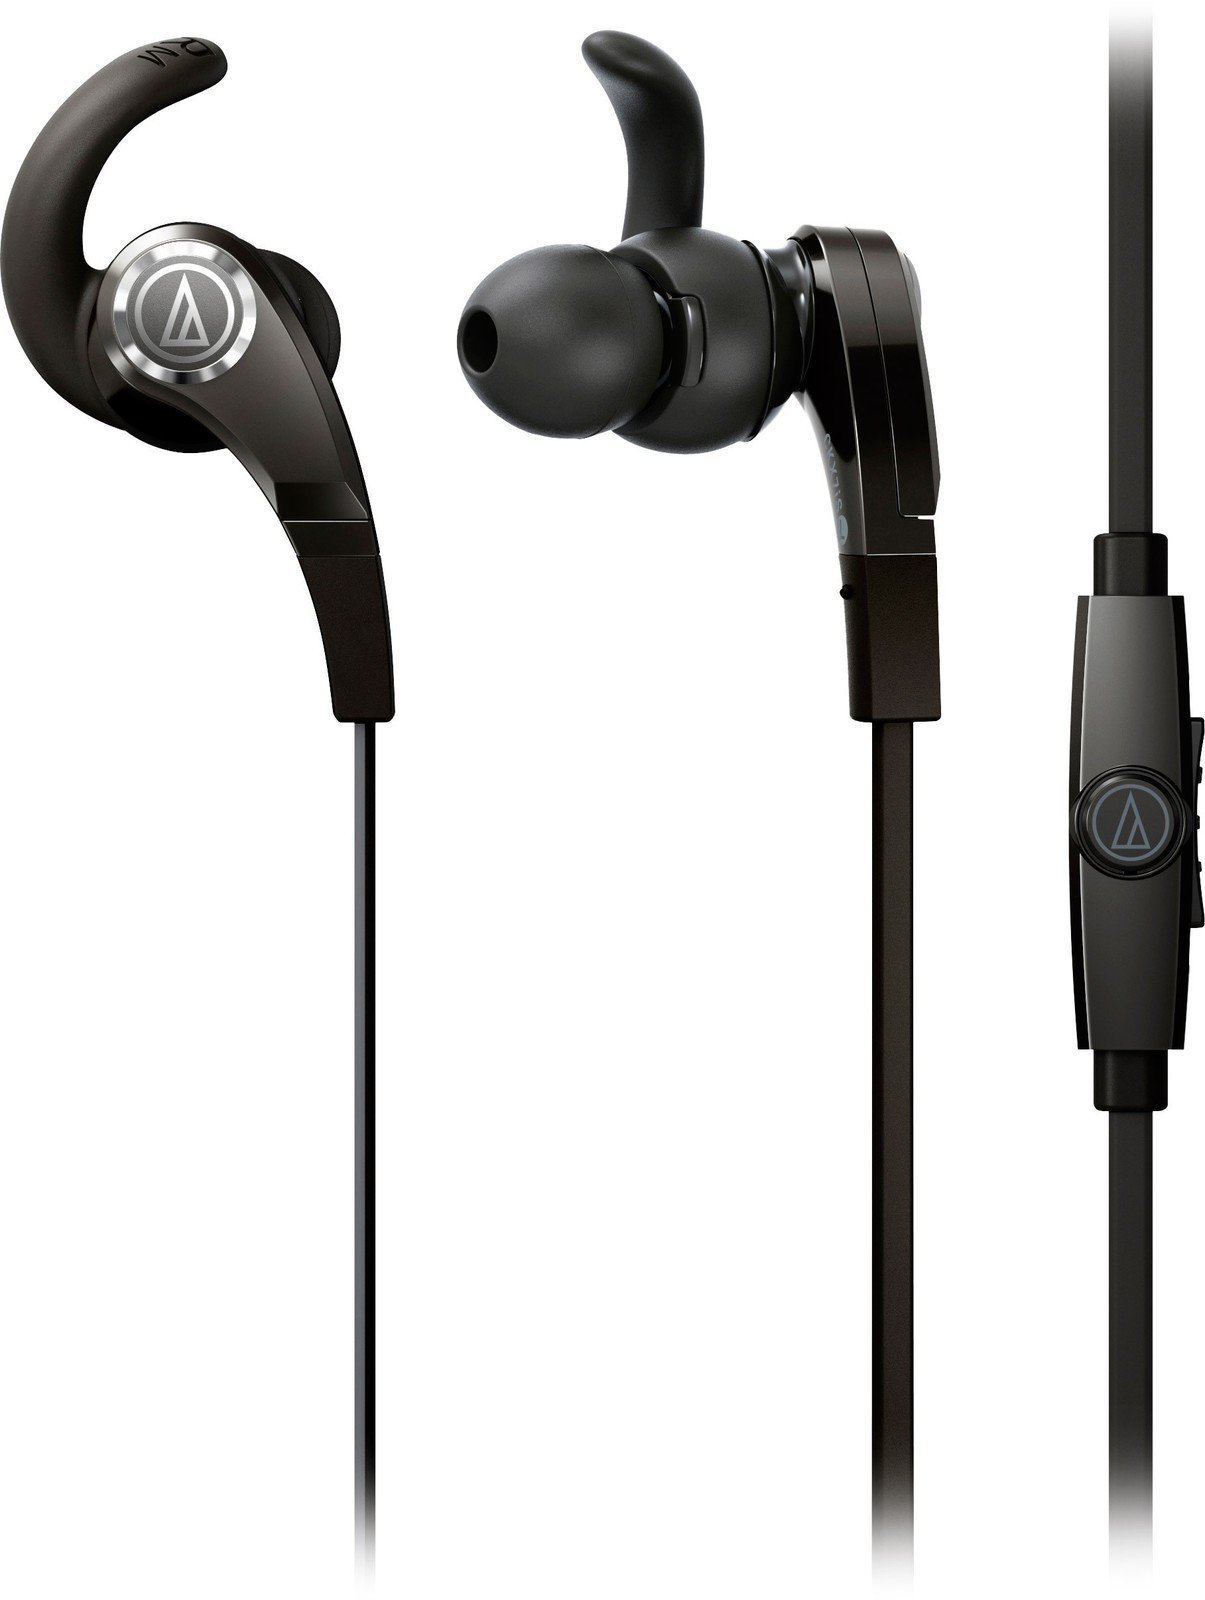 Ecouteurs intra-auriculaires Audio-Technica ATH-CKX7ISBK